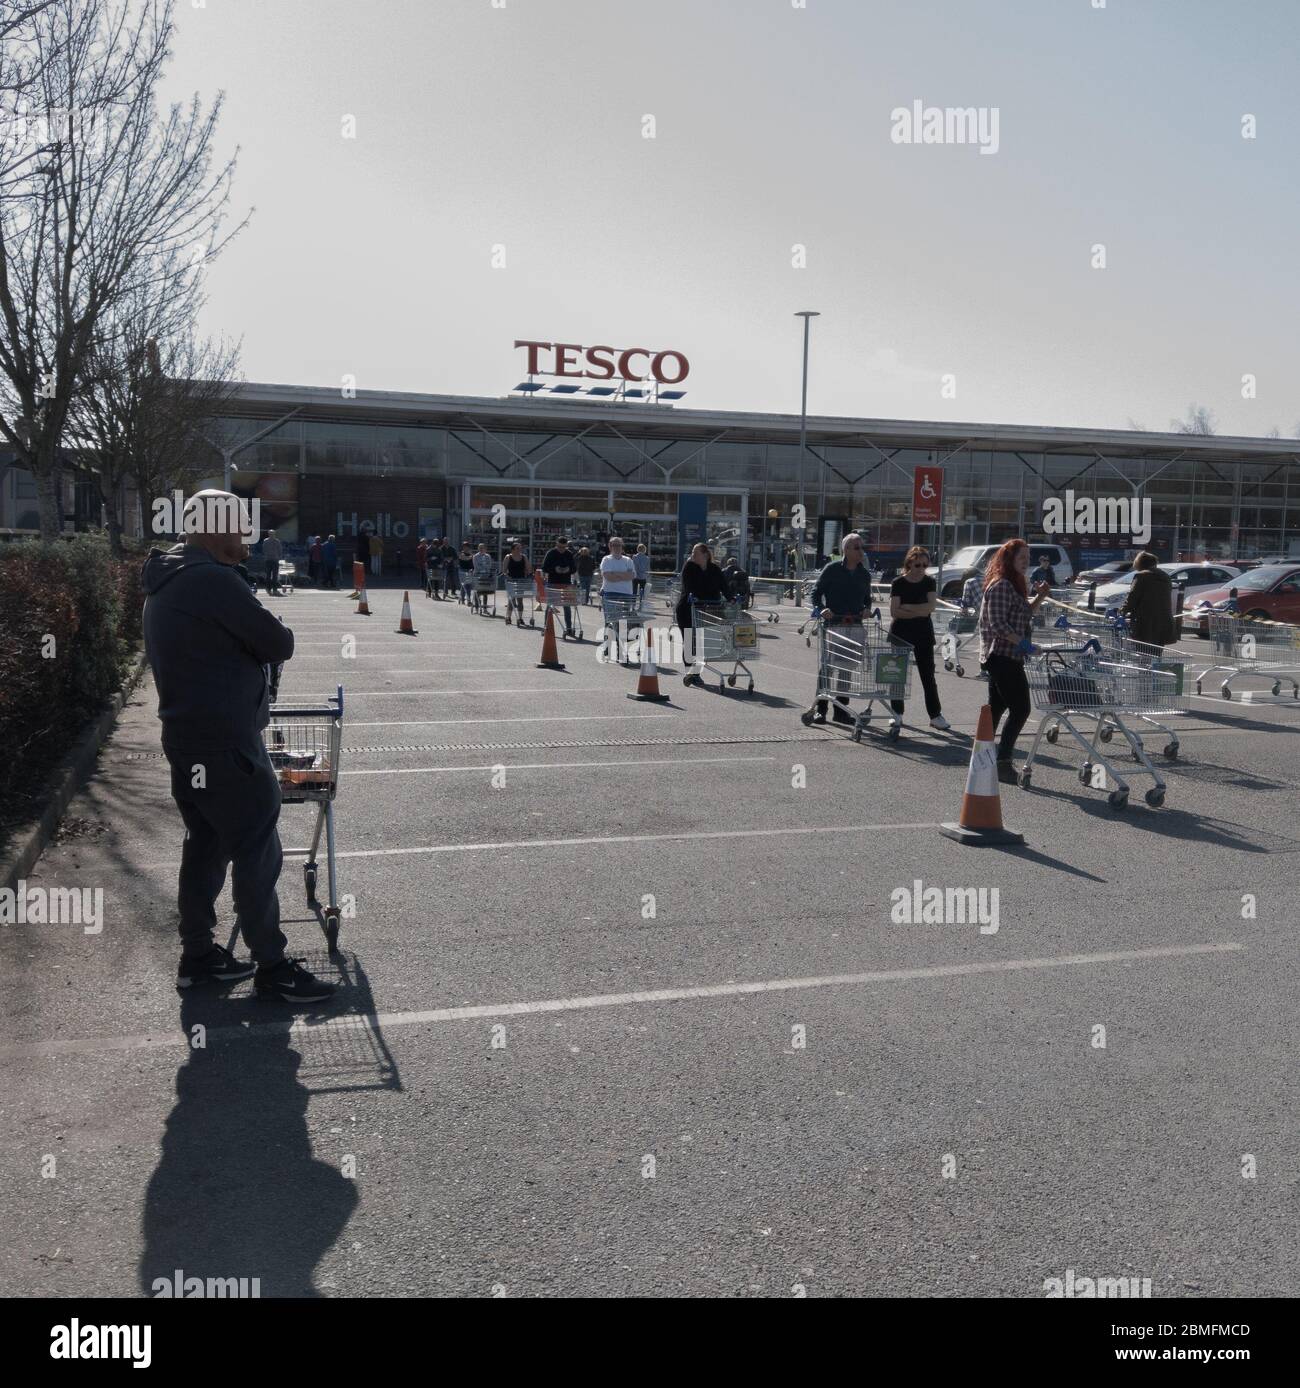 Tesco, Clowne, Chesterfield / U.K - March 26 2020 People queuing up to do the weeks shopping in the U.K. This is midweek at the near the start of the Stock Photo